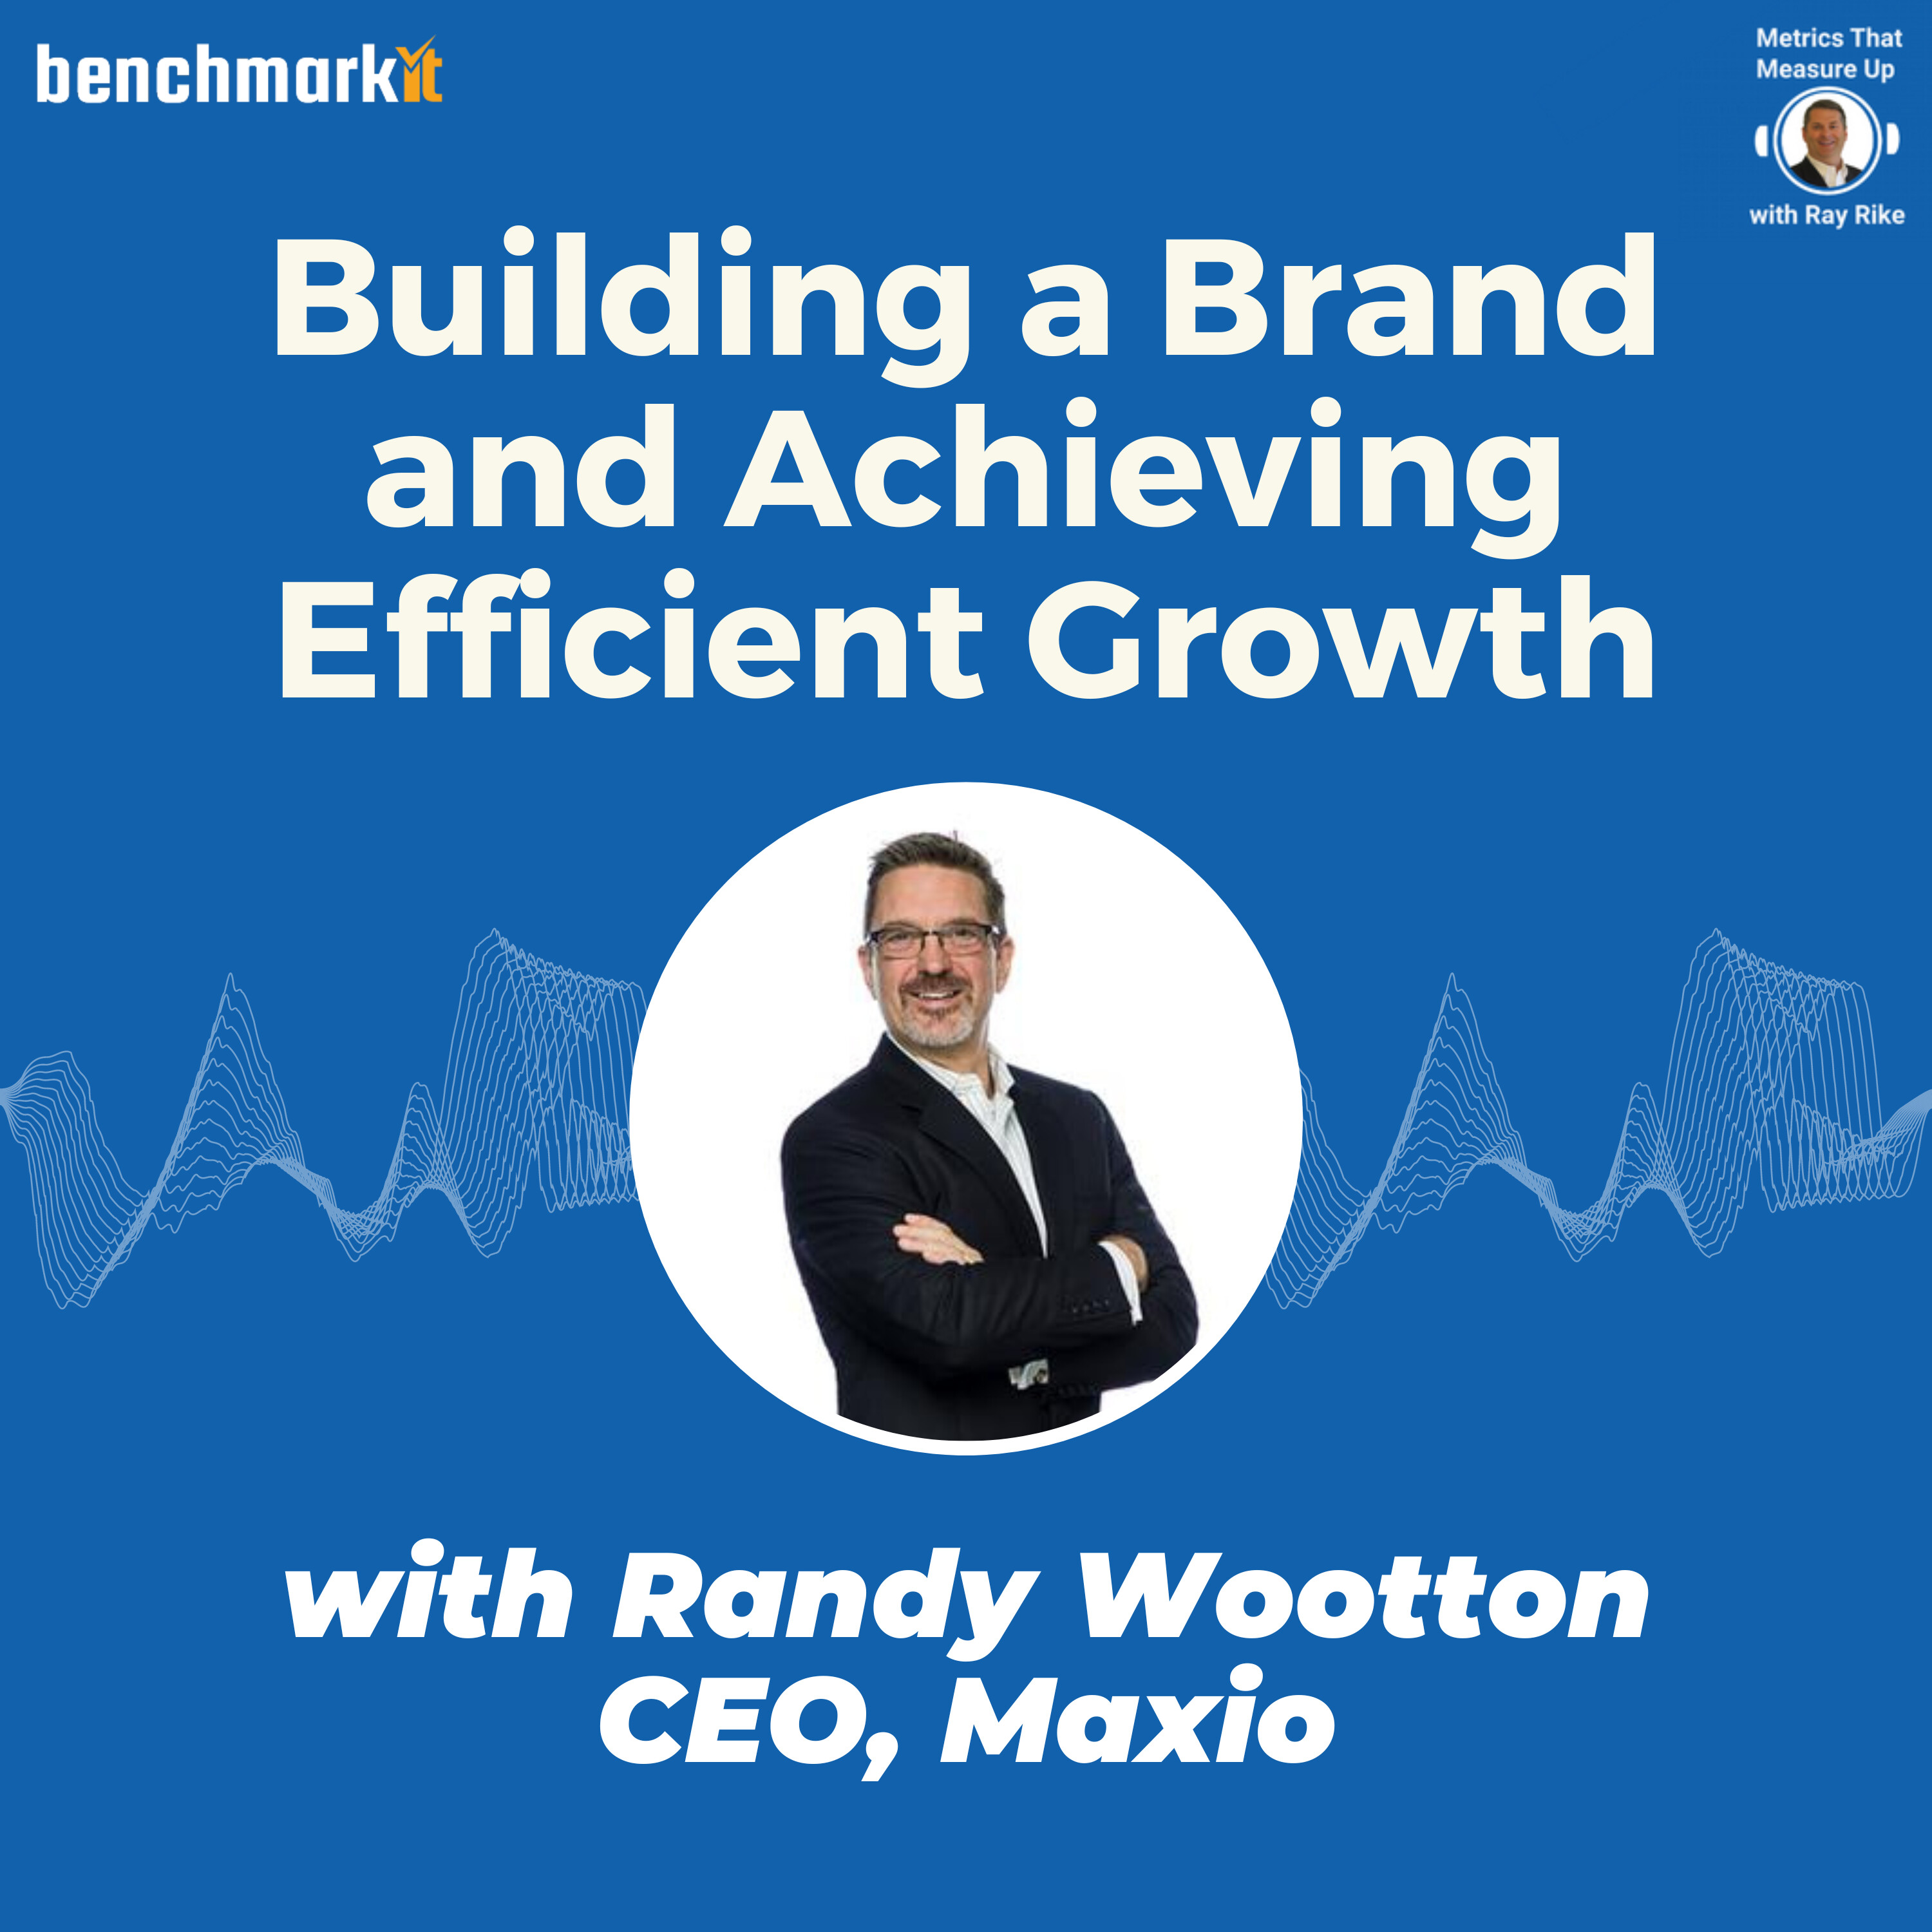 Building a Brand and Efficient Growth Simultaneously, with Randy Wootton, CEO Maxio